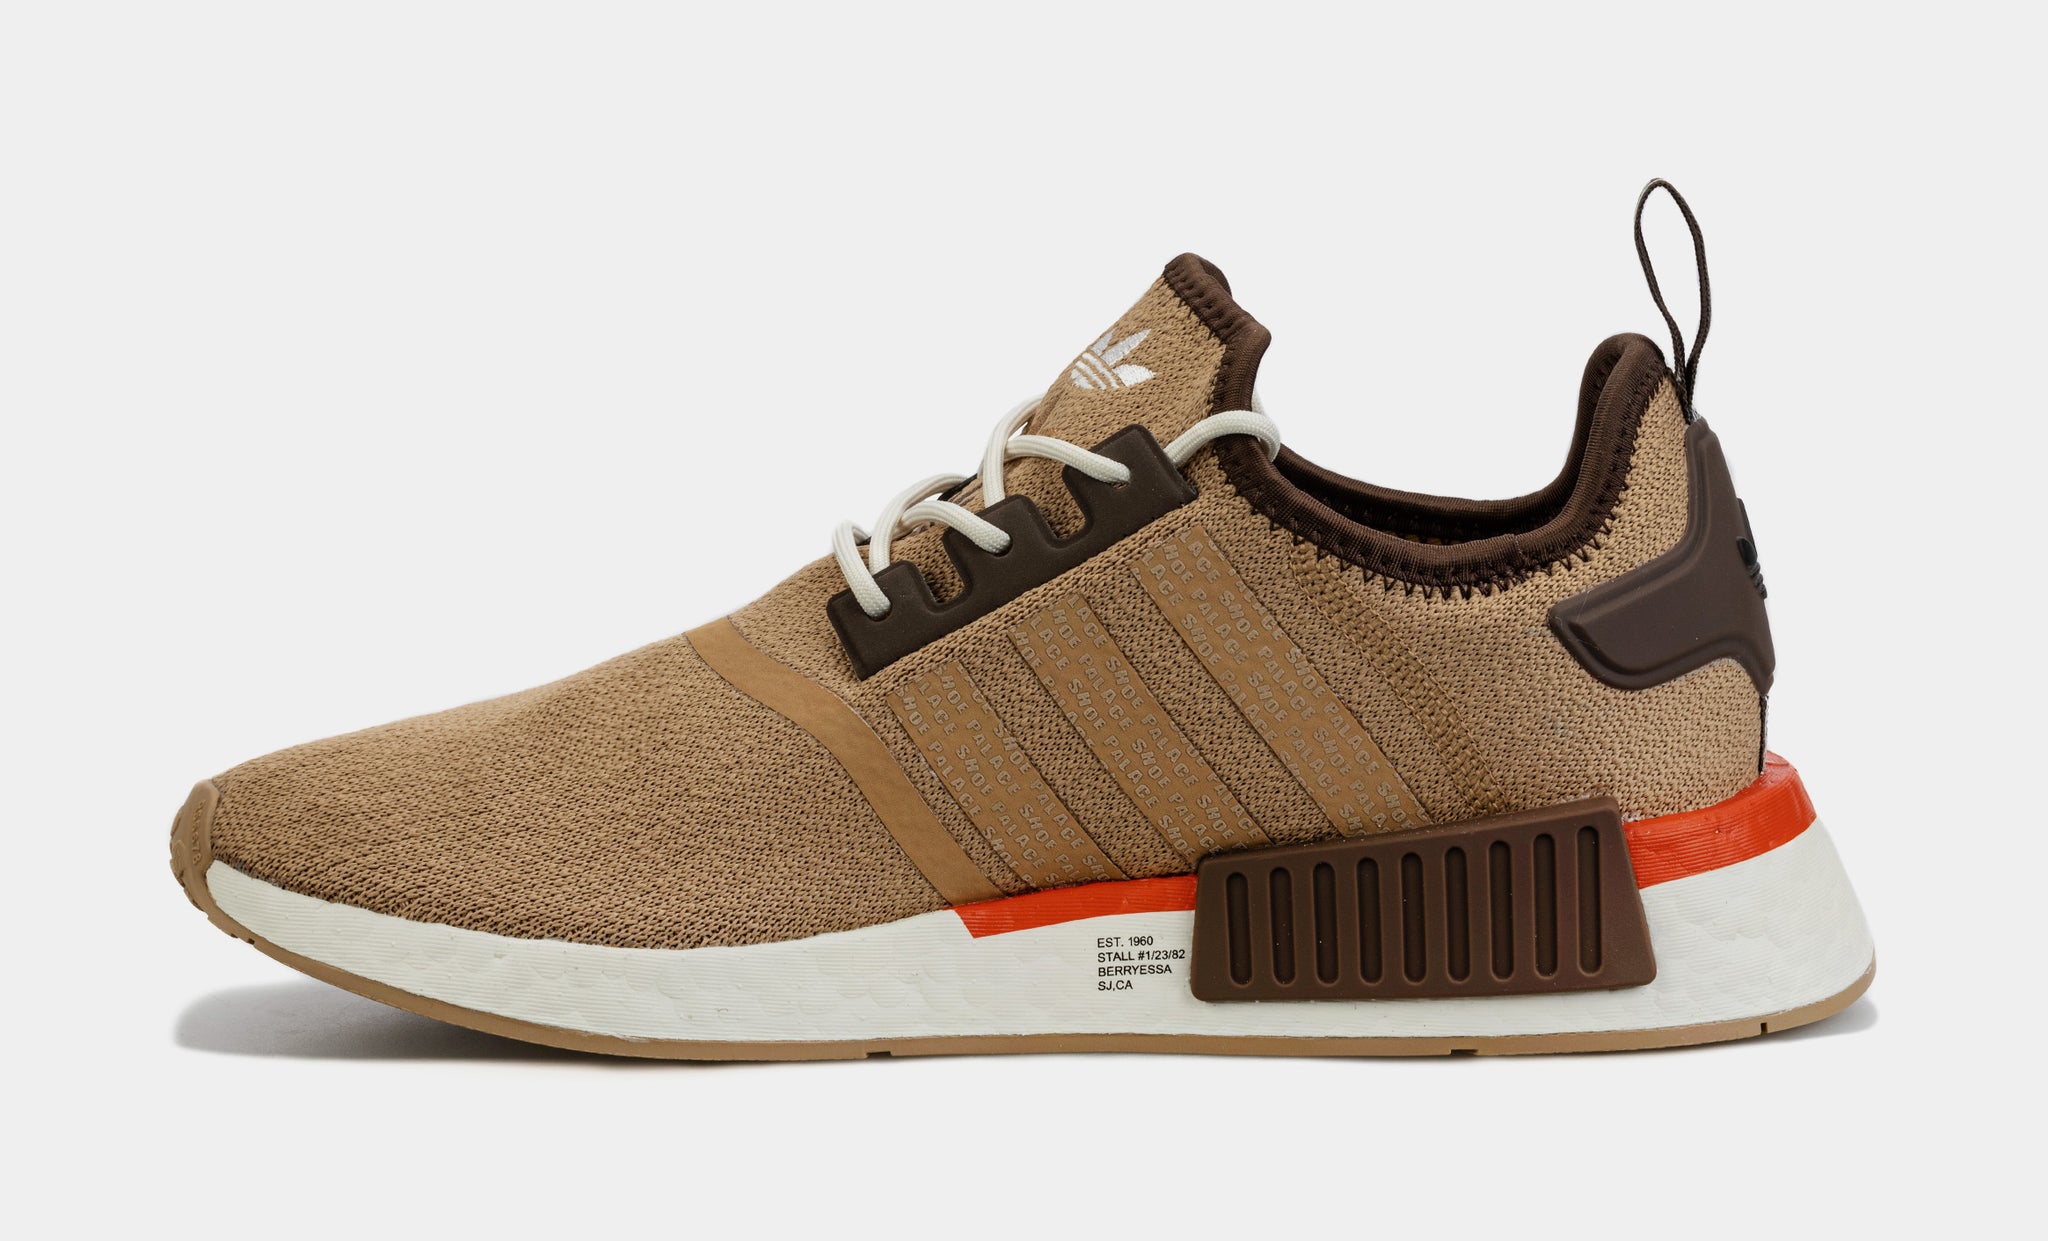 Tal højt repræsentant Cirkel adidas Shoe Palace Exclusive NMD R1 The Flea Mens Lifestyle Shoes Cardboard  IG7926